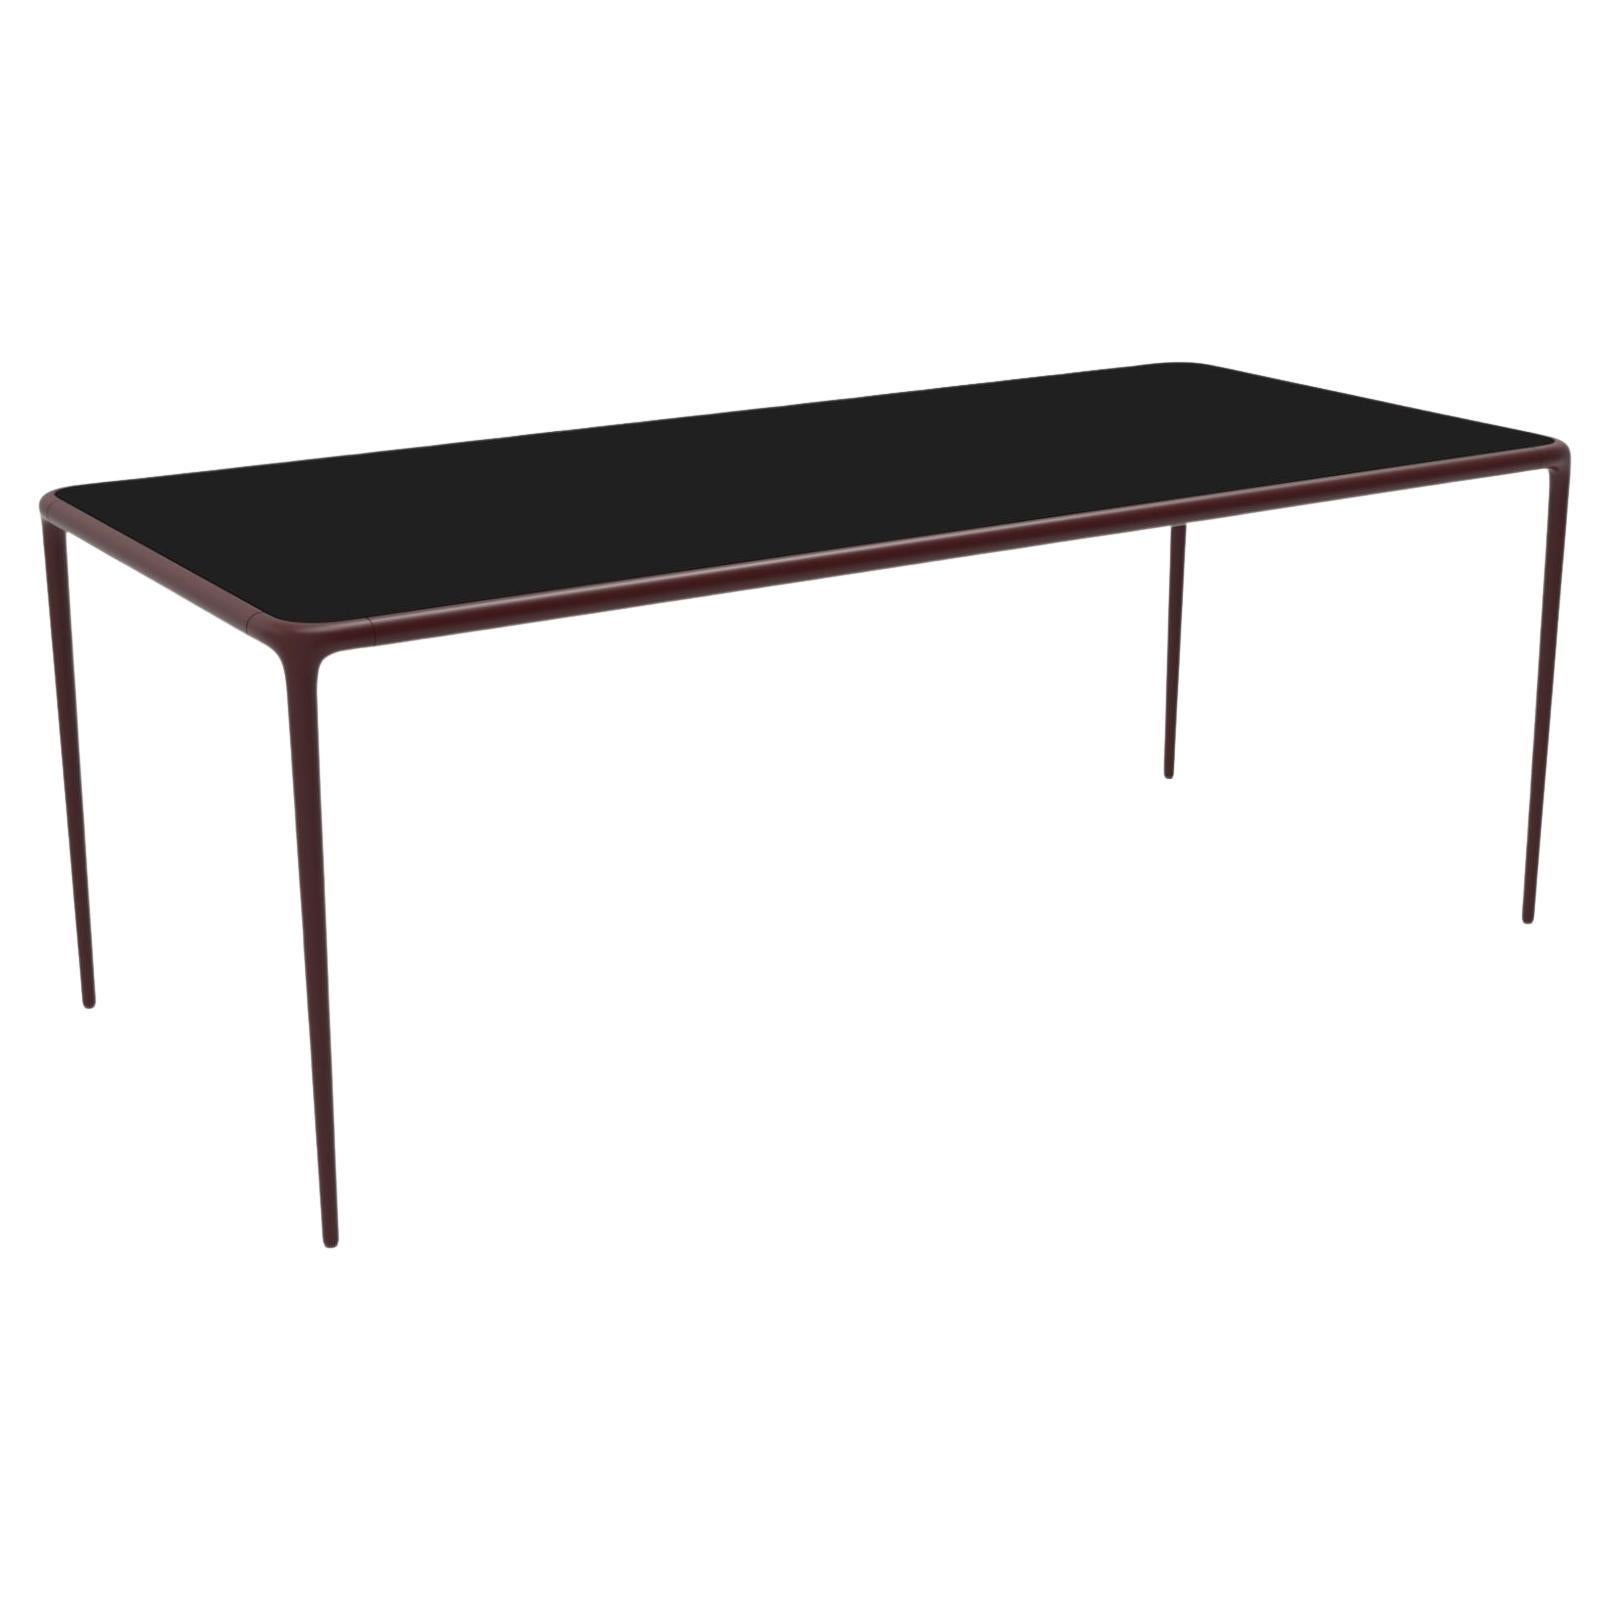 Xaloc Burgundy Glass Top Table 200 by Mowee For Sale